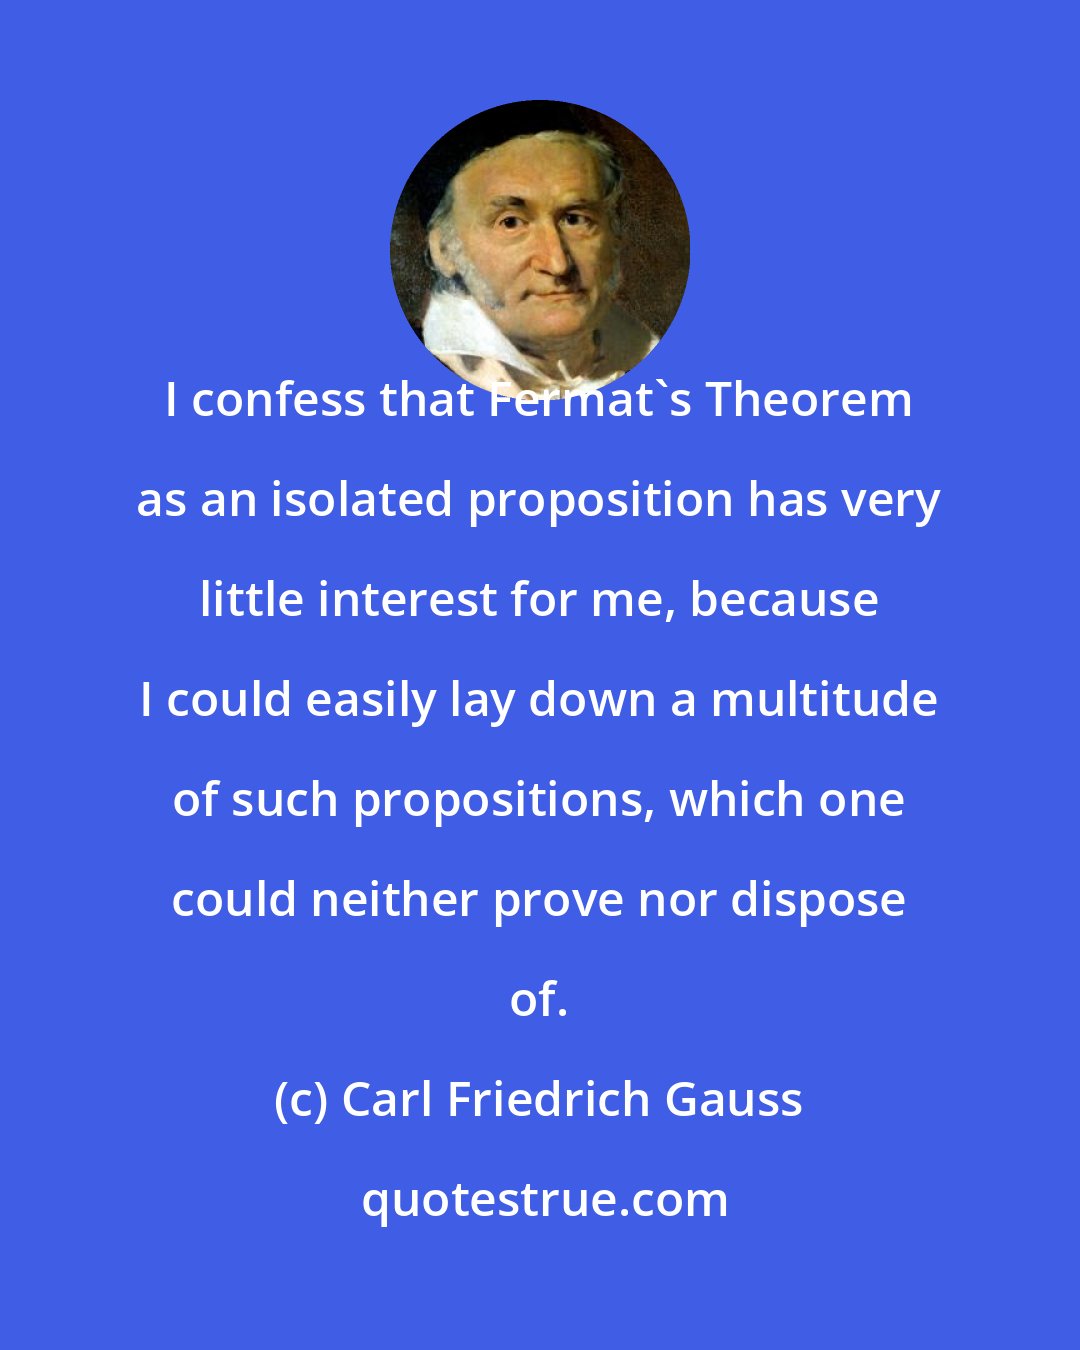 Carl Friedrich Gauss: I confess that Fermat's Theorem as an isolated proposition has very little interest for me, because I could easily lay down a multitude of such propositions, which one could neither prove nor dispose of.